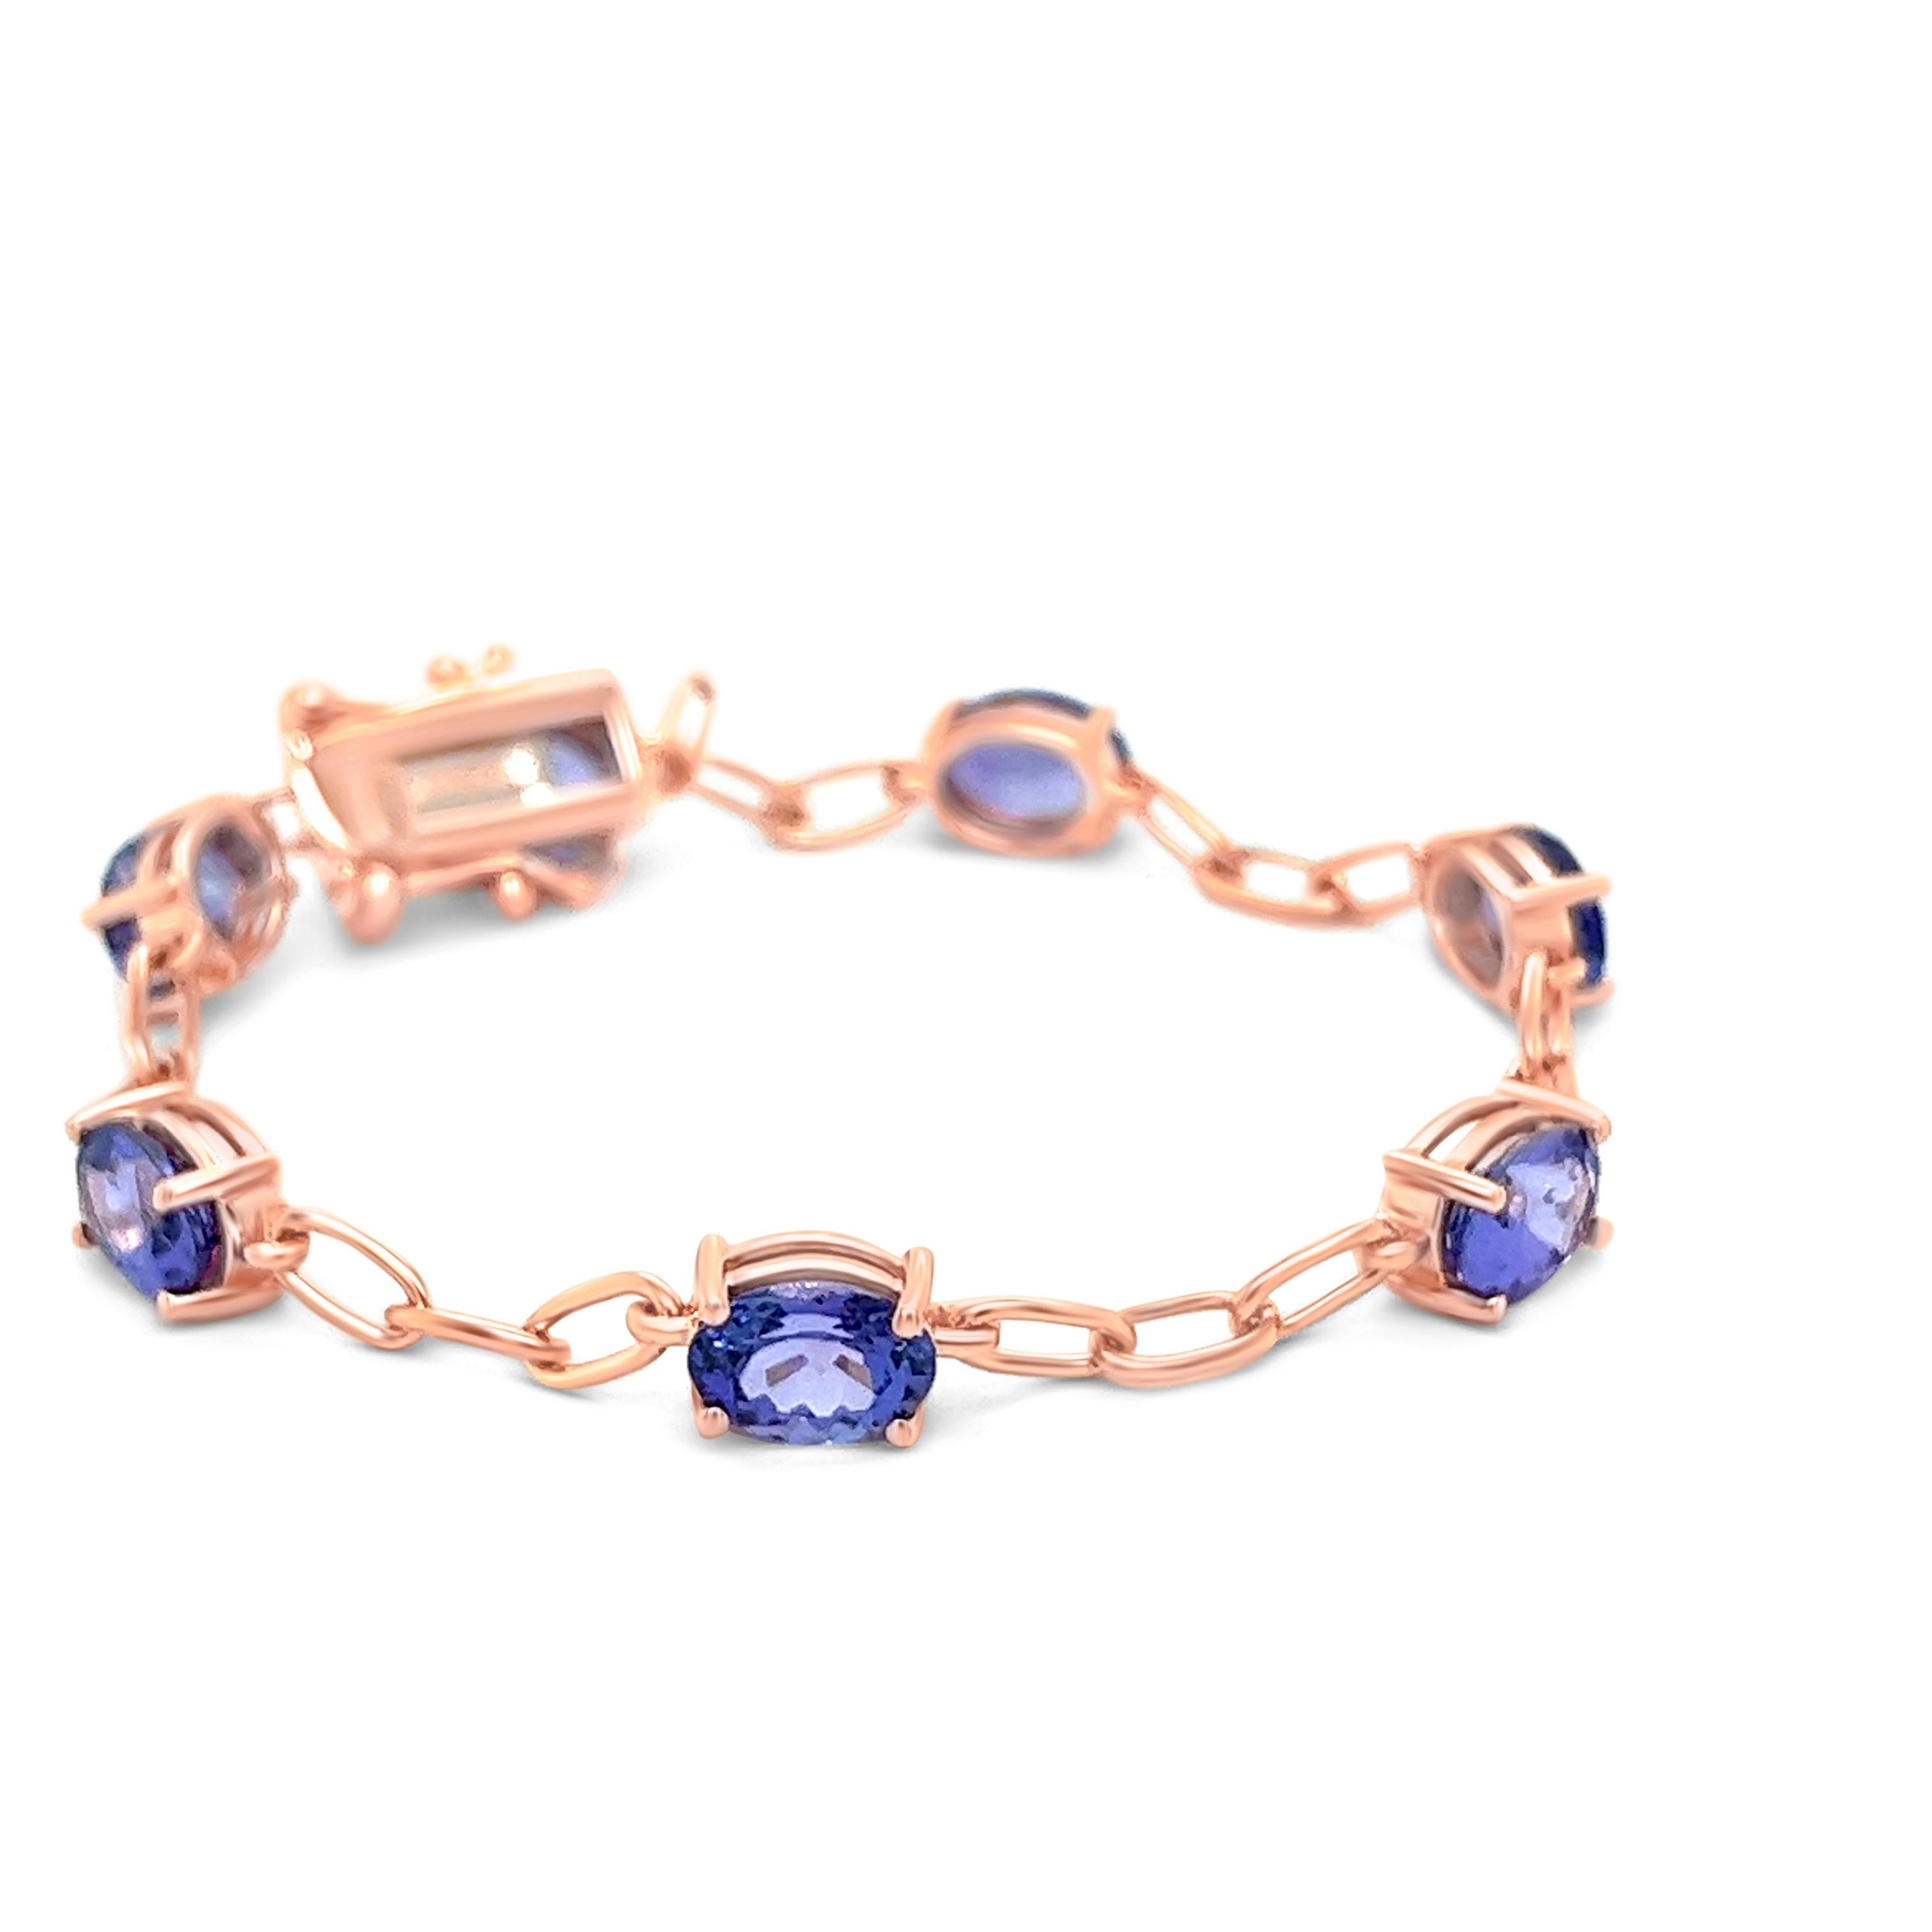 Oval Cut 7.85 Carats Natural Tanzanite & Cubic Zirconia Bracelet For Women Jewelry  For Sale